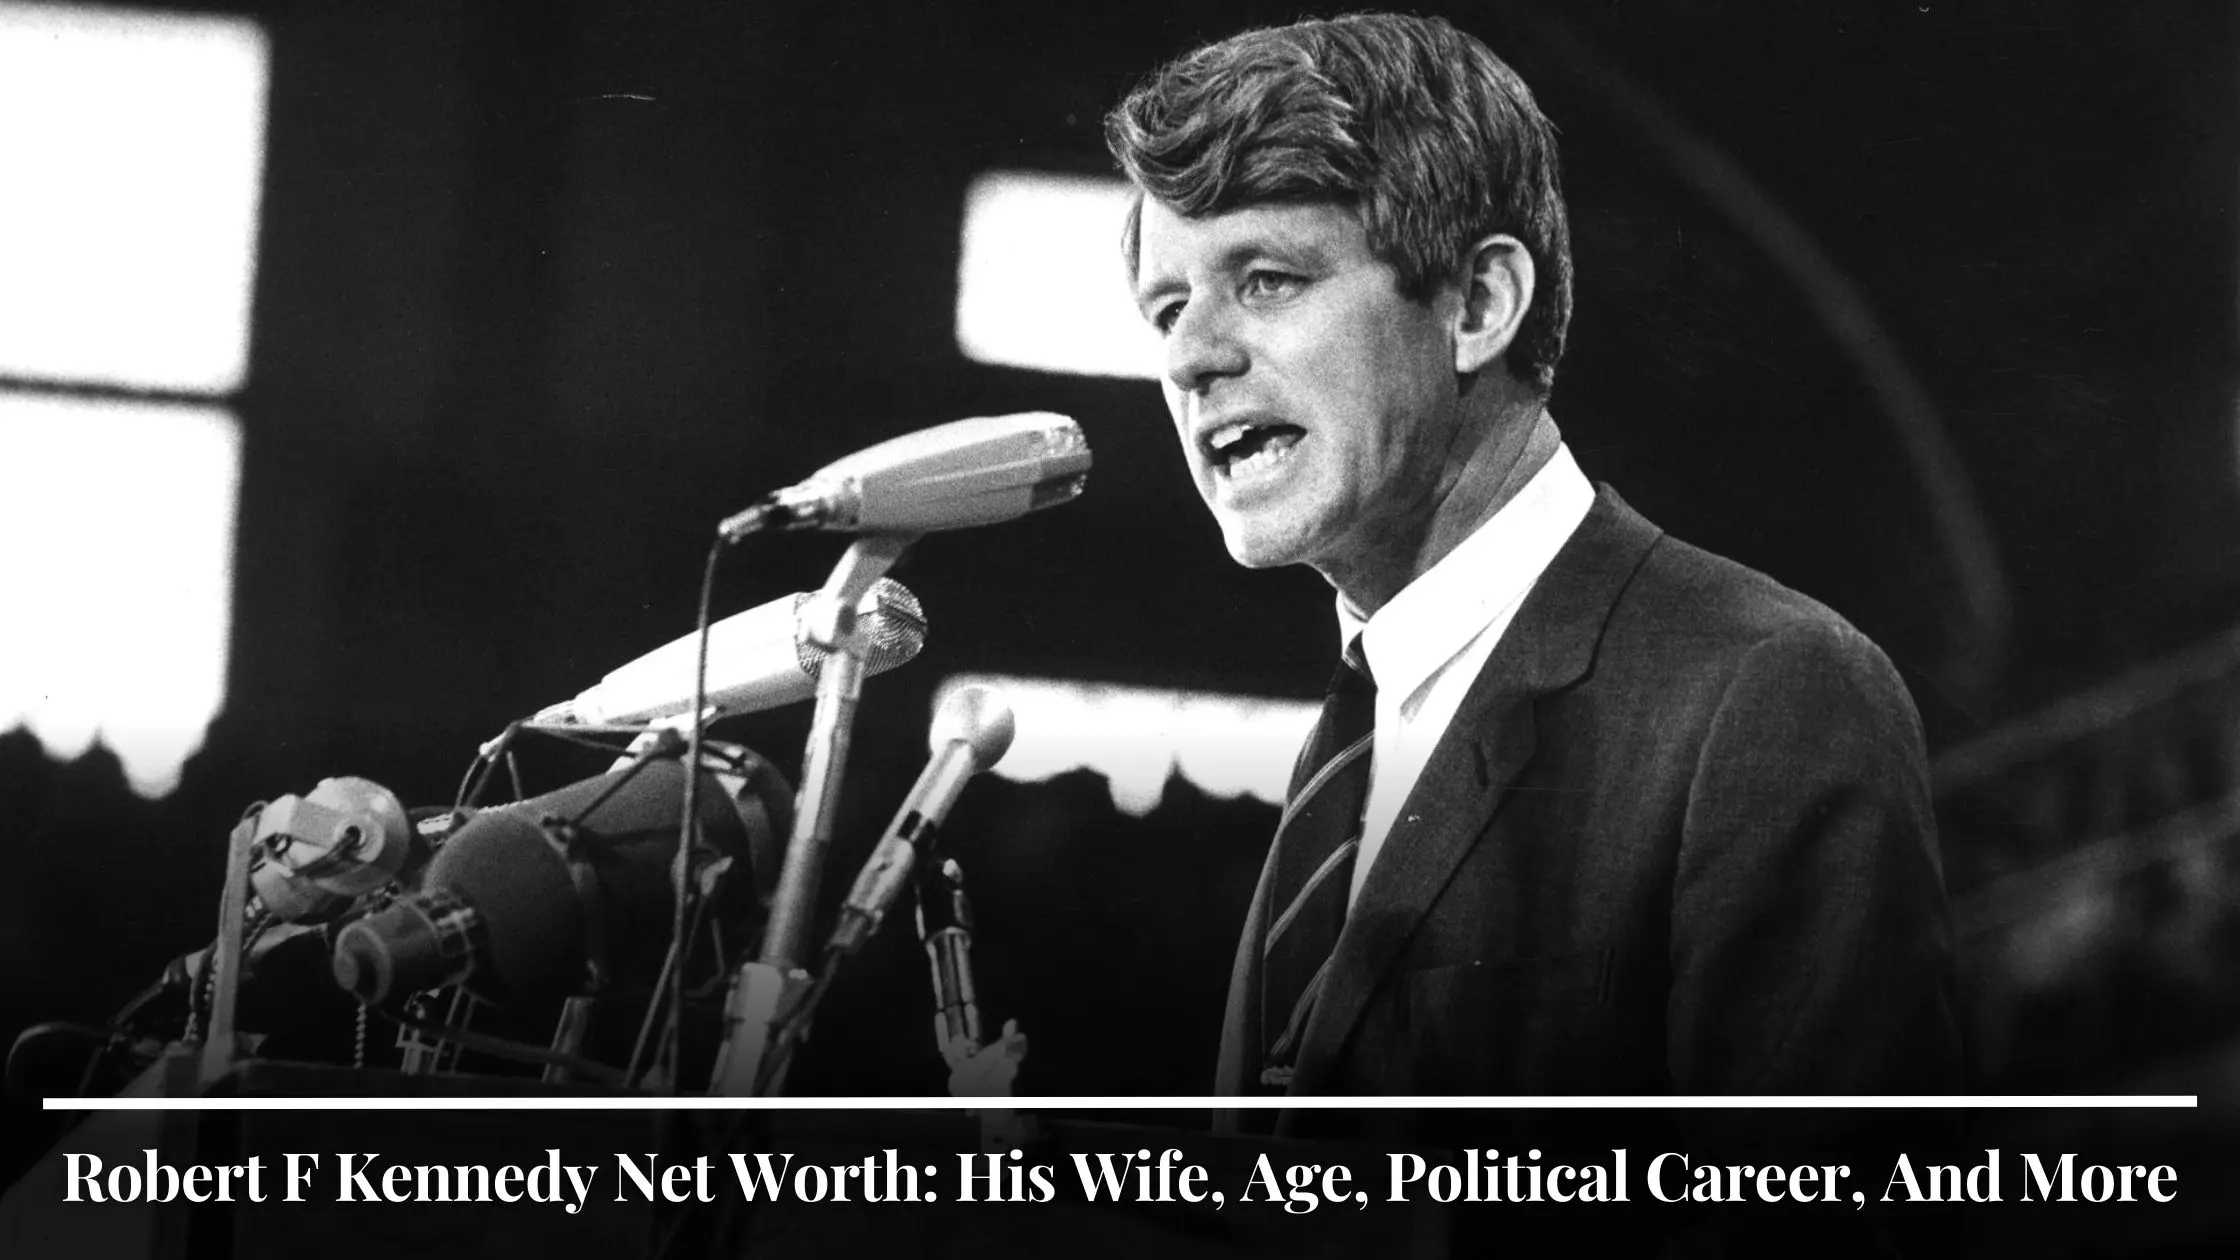 Robert F Kennedy Net Worth His Wife, Age, Political Career, And More